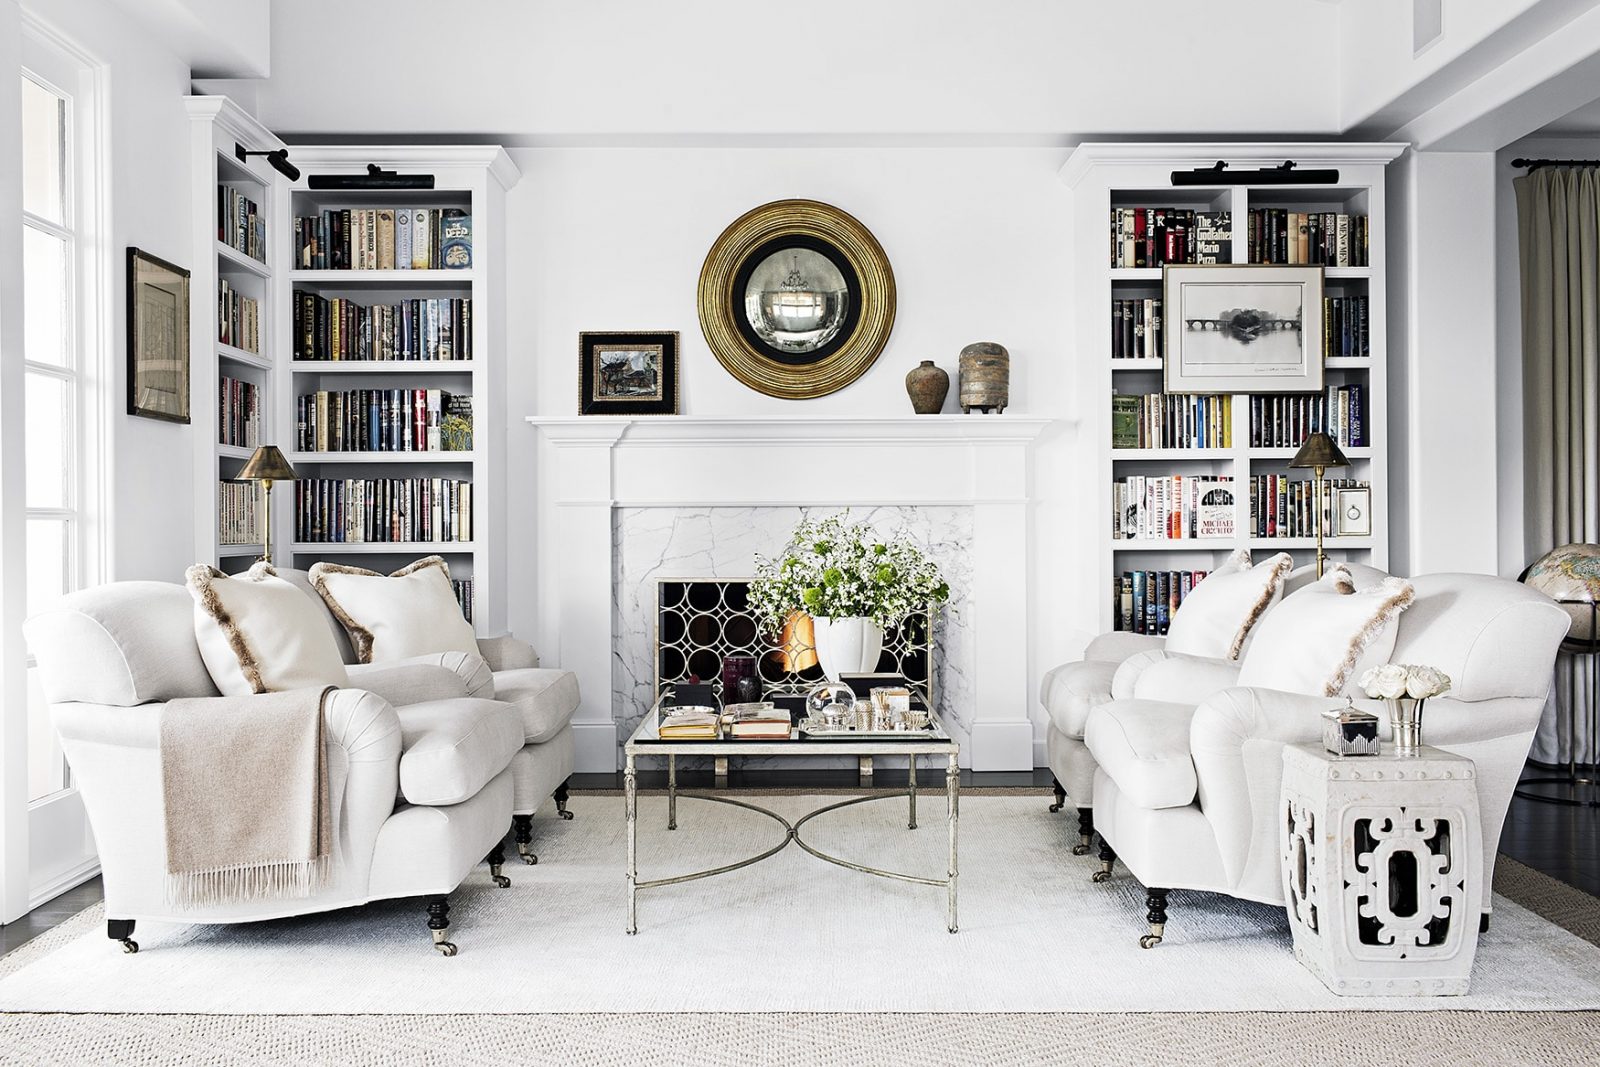 17 Fabulous Ideas Of Fireplace With, Bookshelves For Each Side Of Fireplace